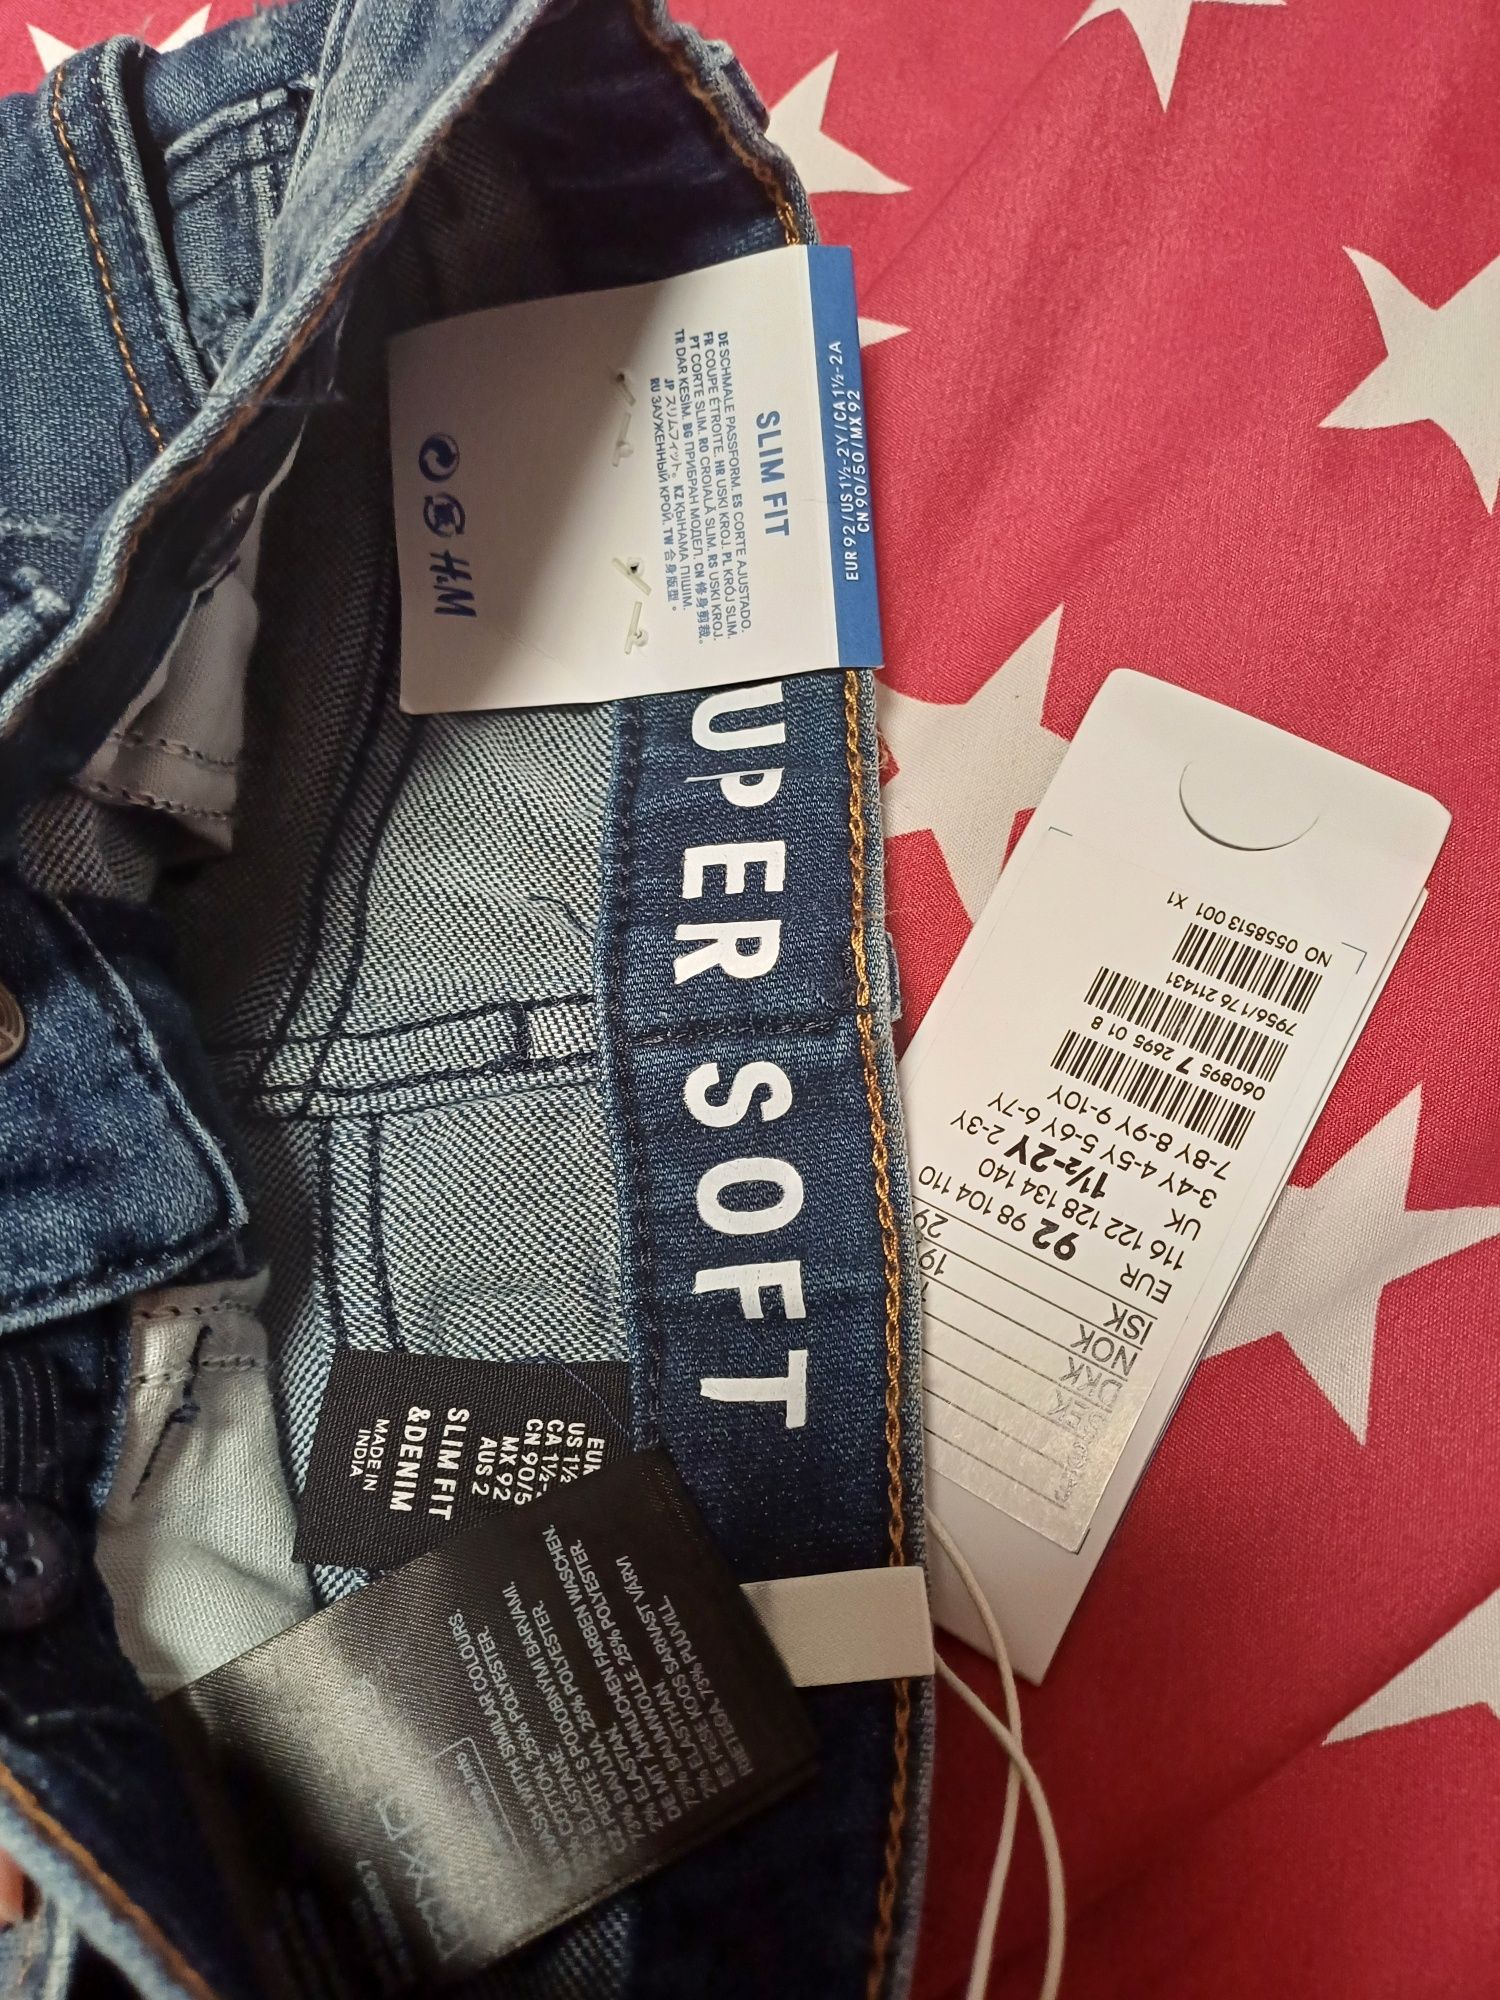 Nowe jeansy h&m 92